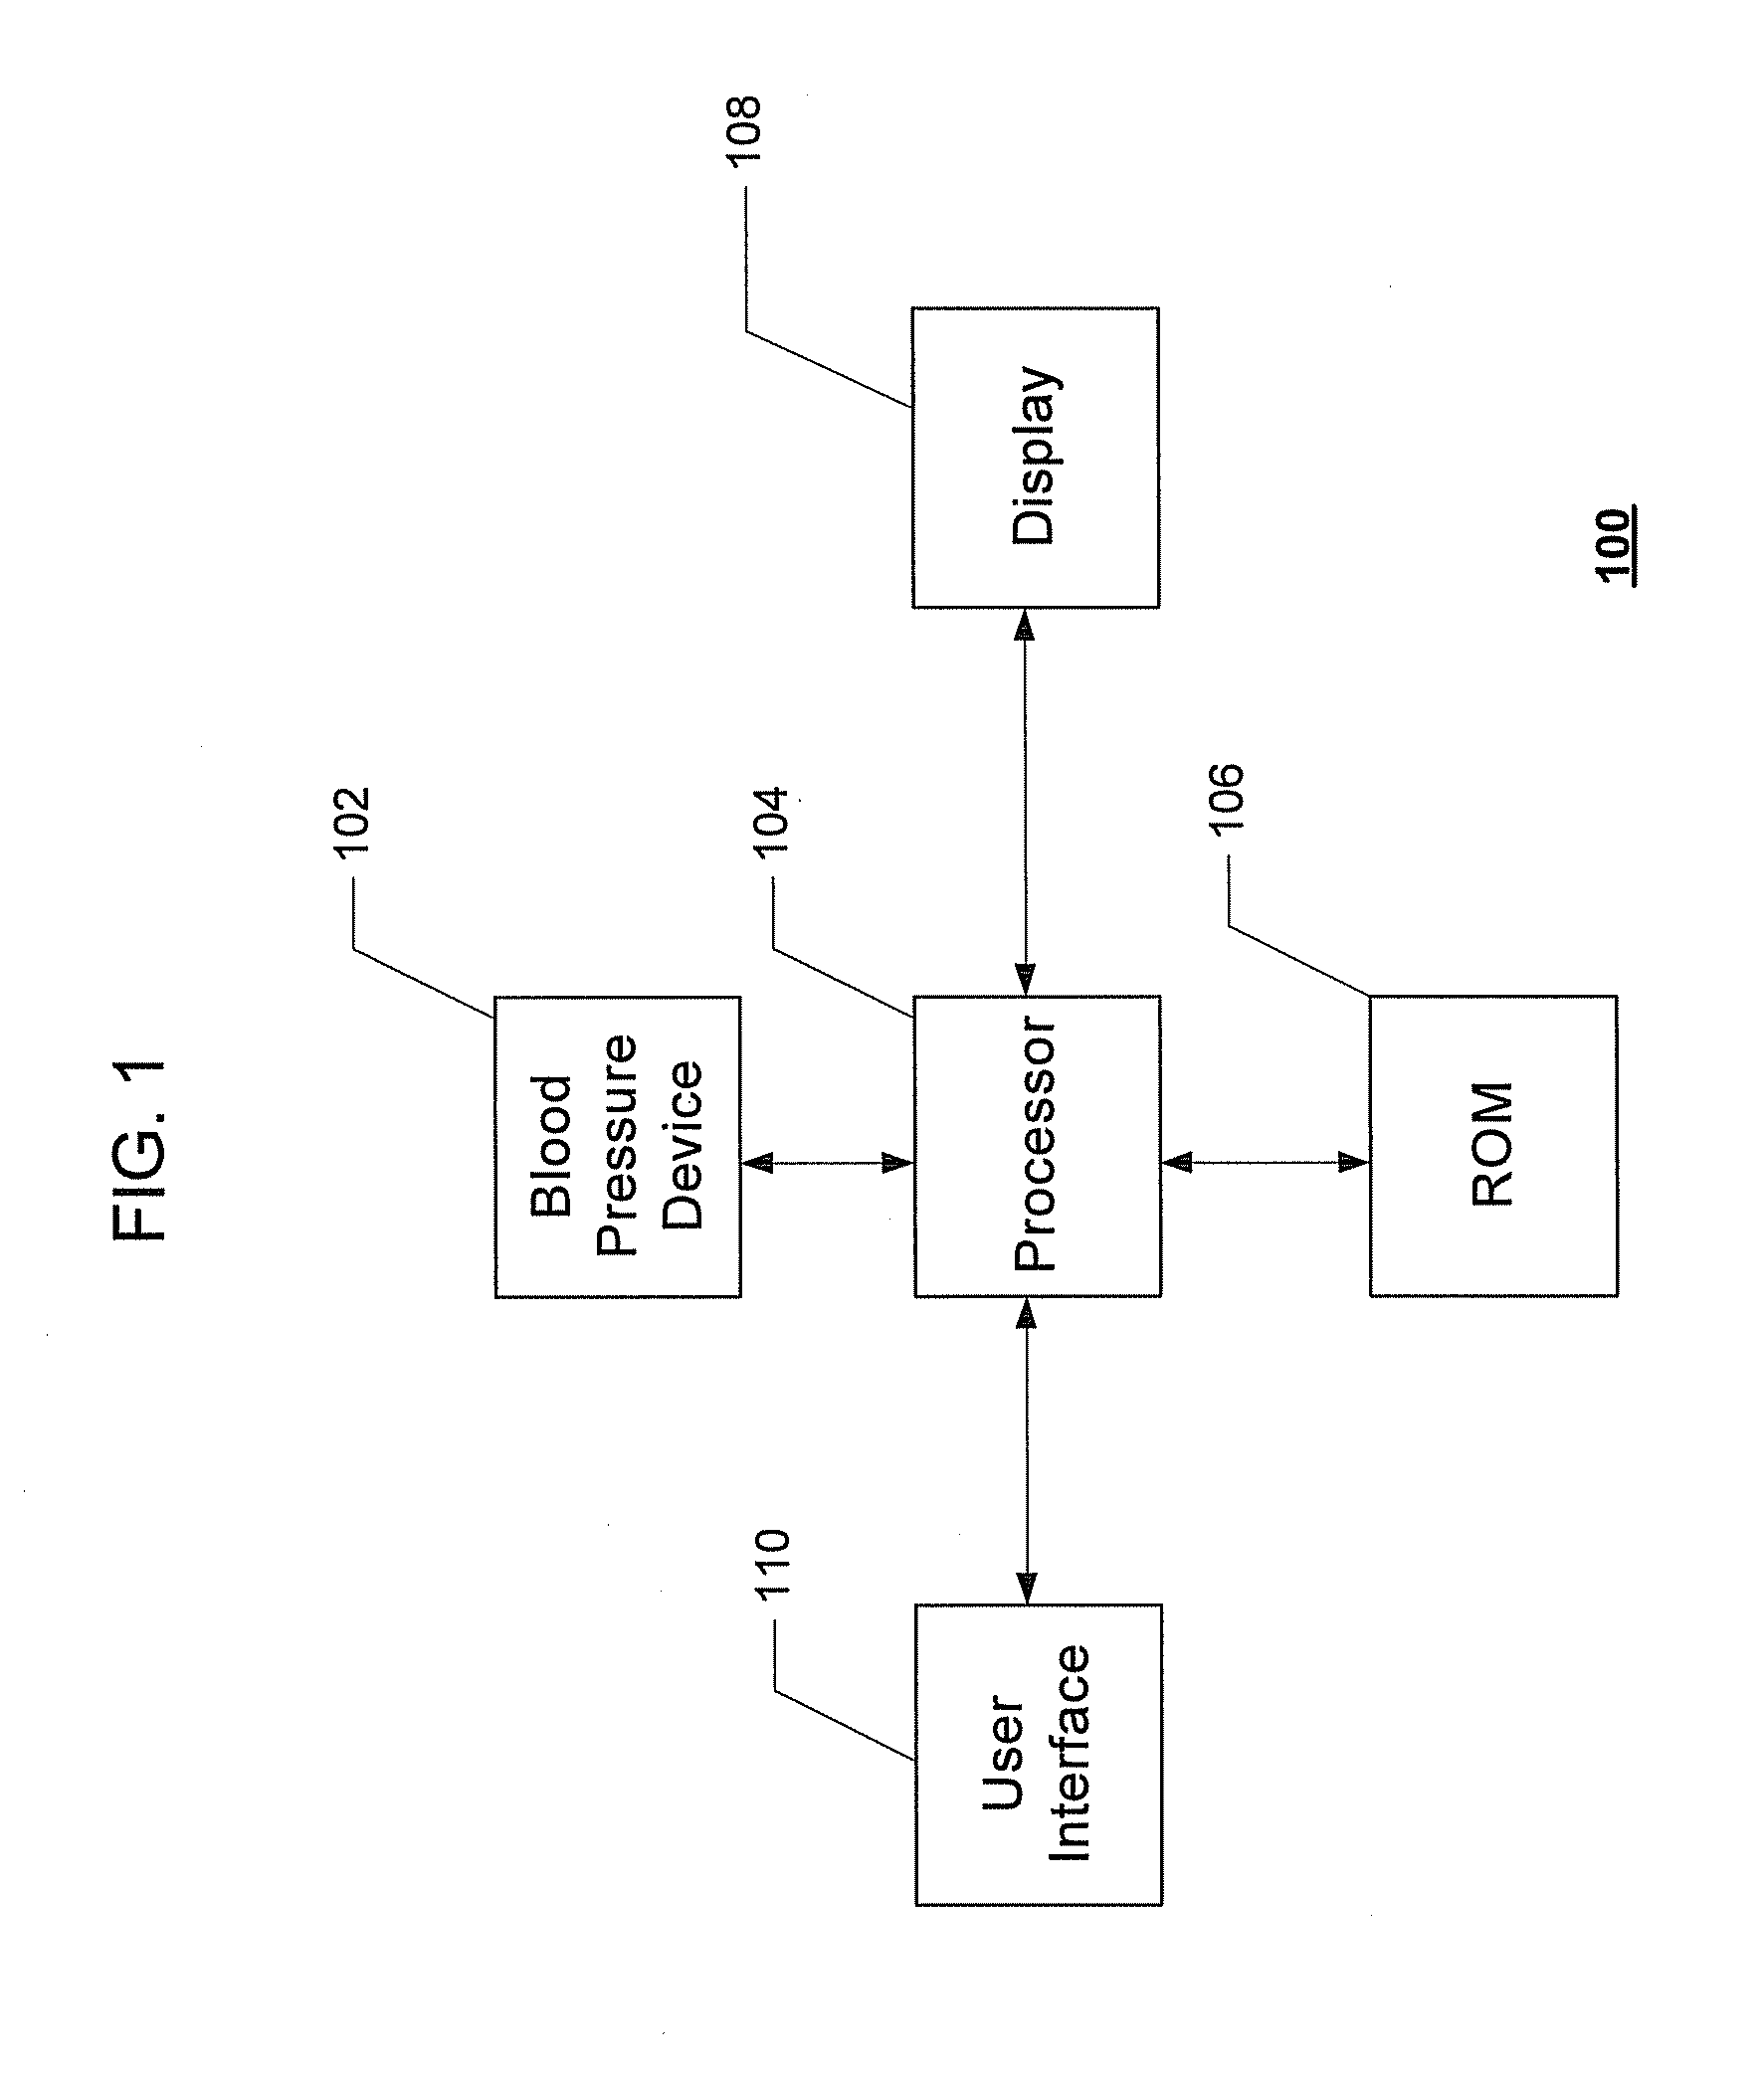 Systems and Methods for Model-Based Estimation of Cardiac Output and Total Peripheral Resistance